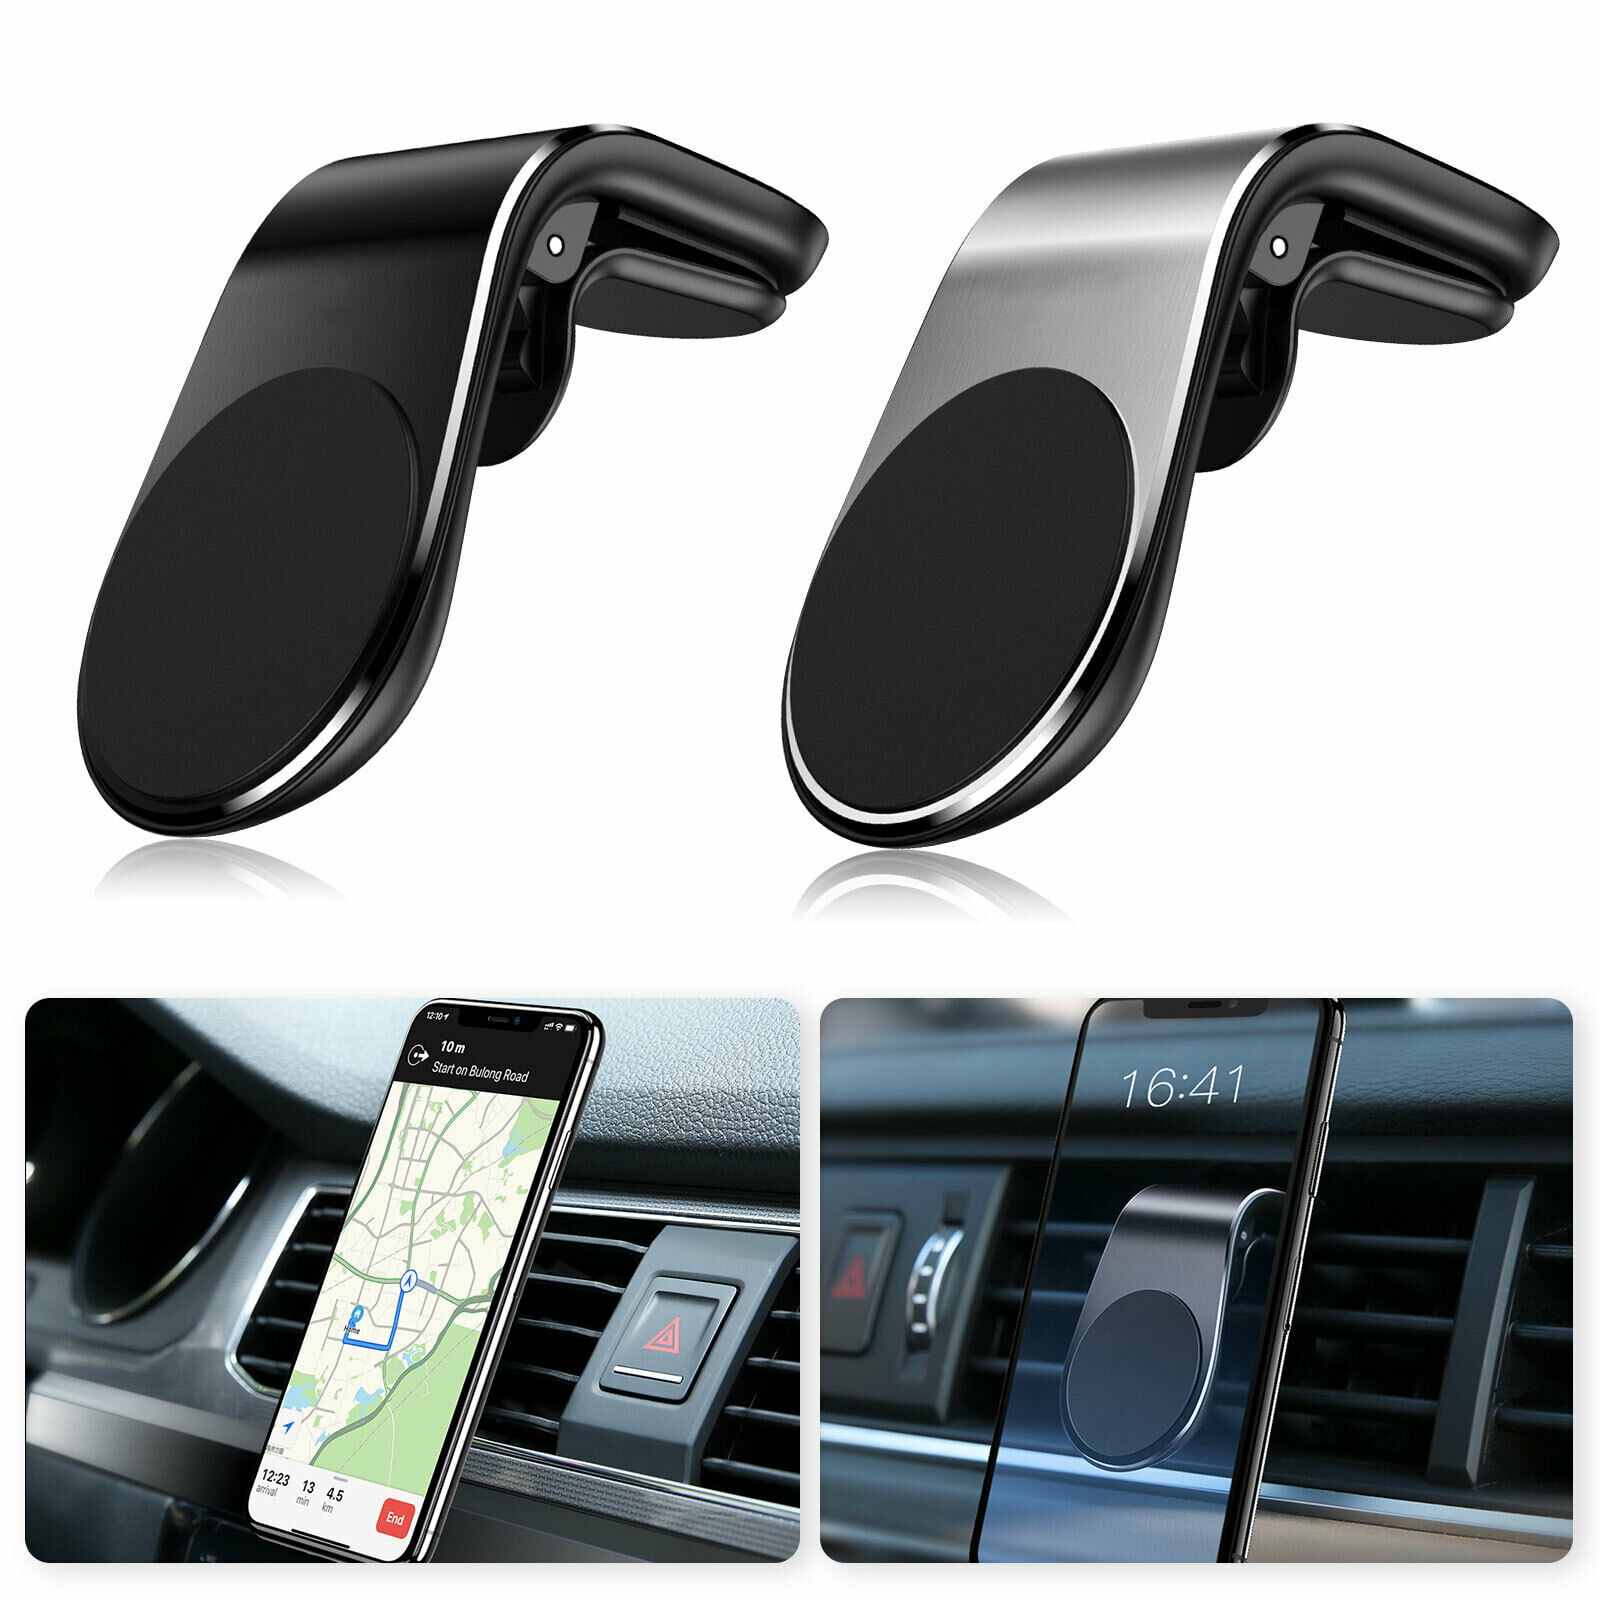 Cell Phone Holder for car Vent Blue Cell Phone Holder for Car Air Even Single Star car Mount Phone Holder for iPhone 7 iPhone x Huawei 